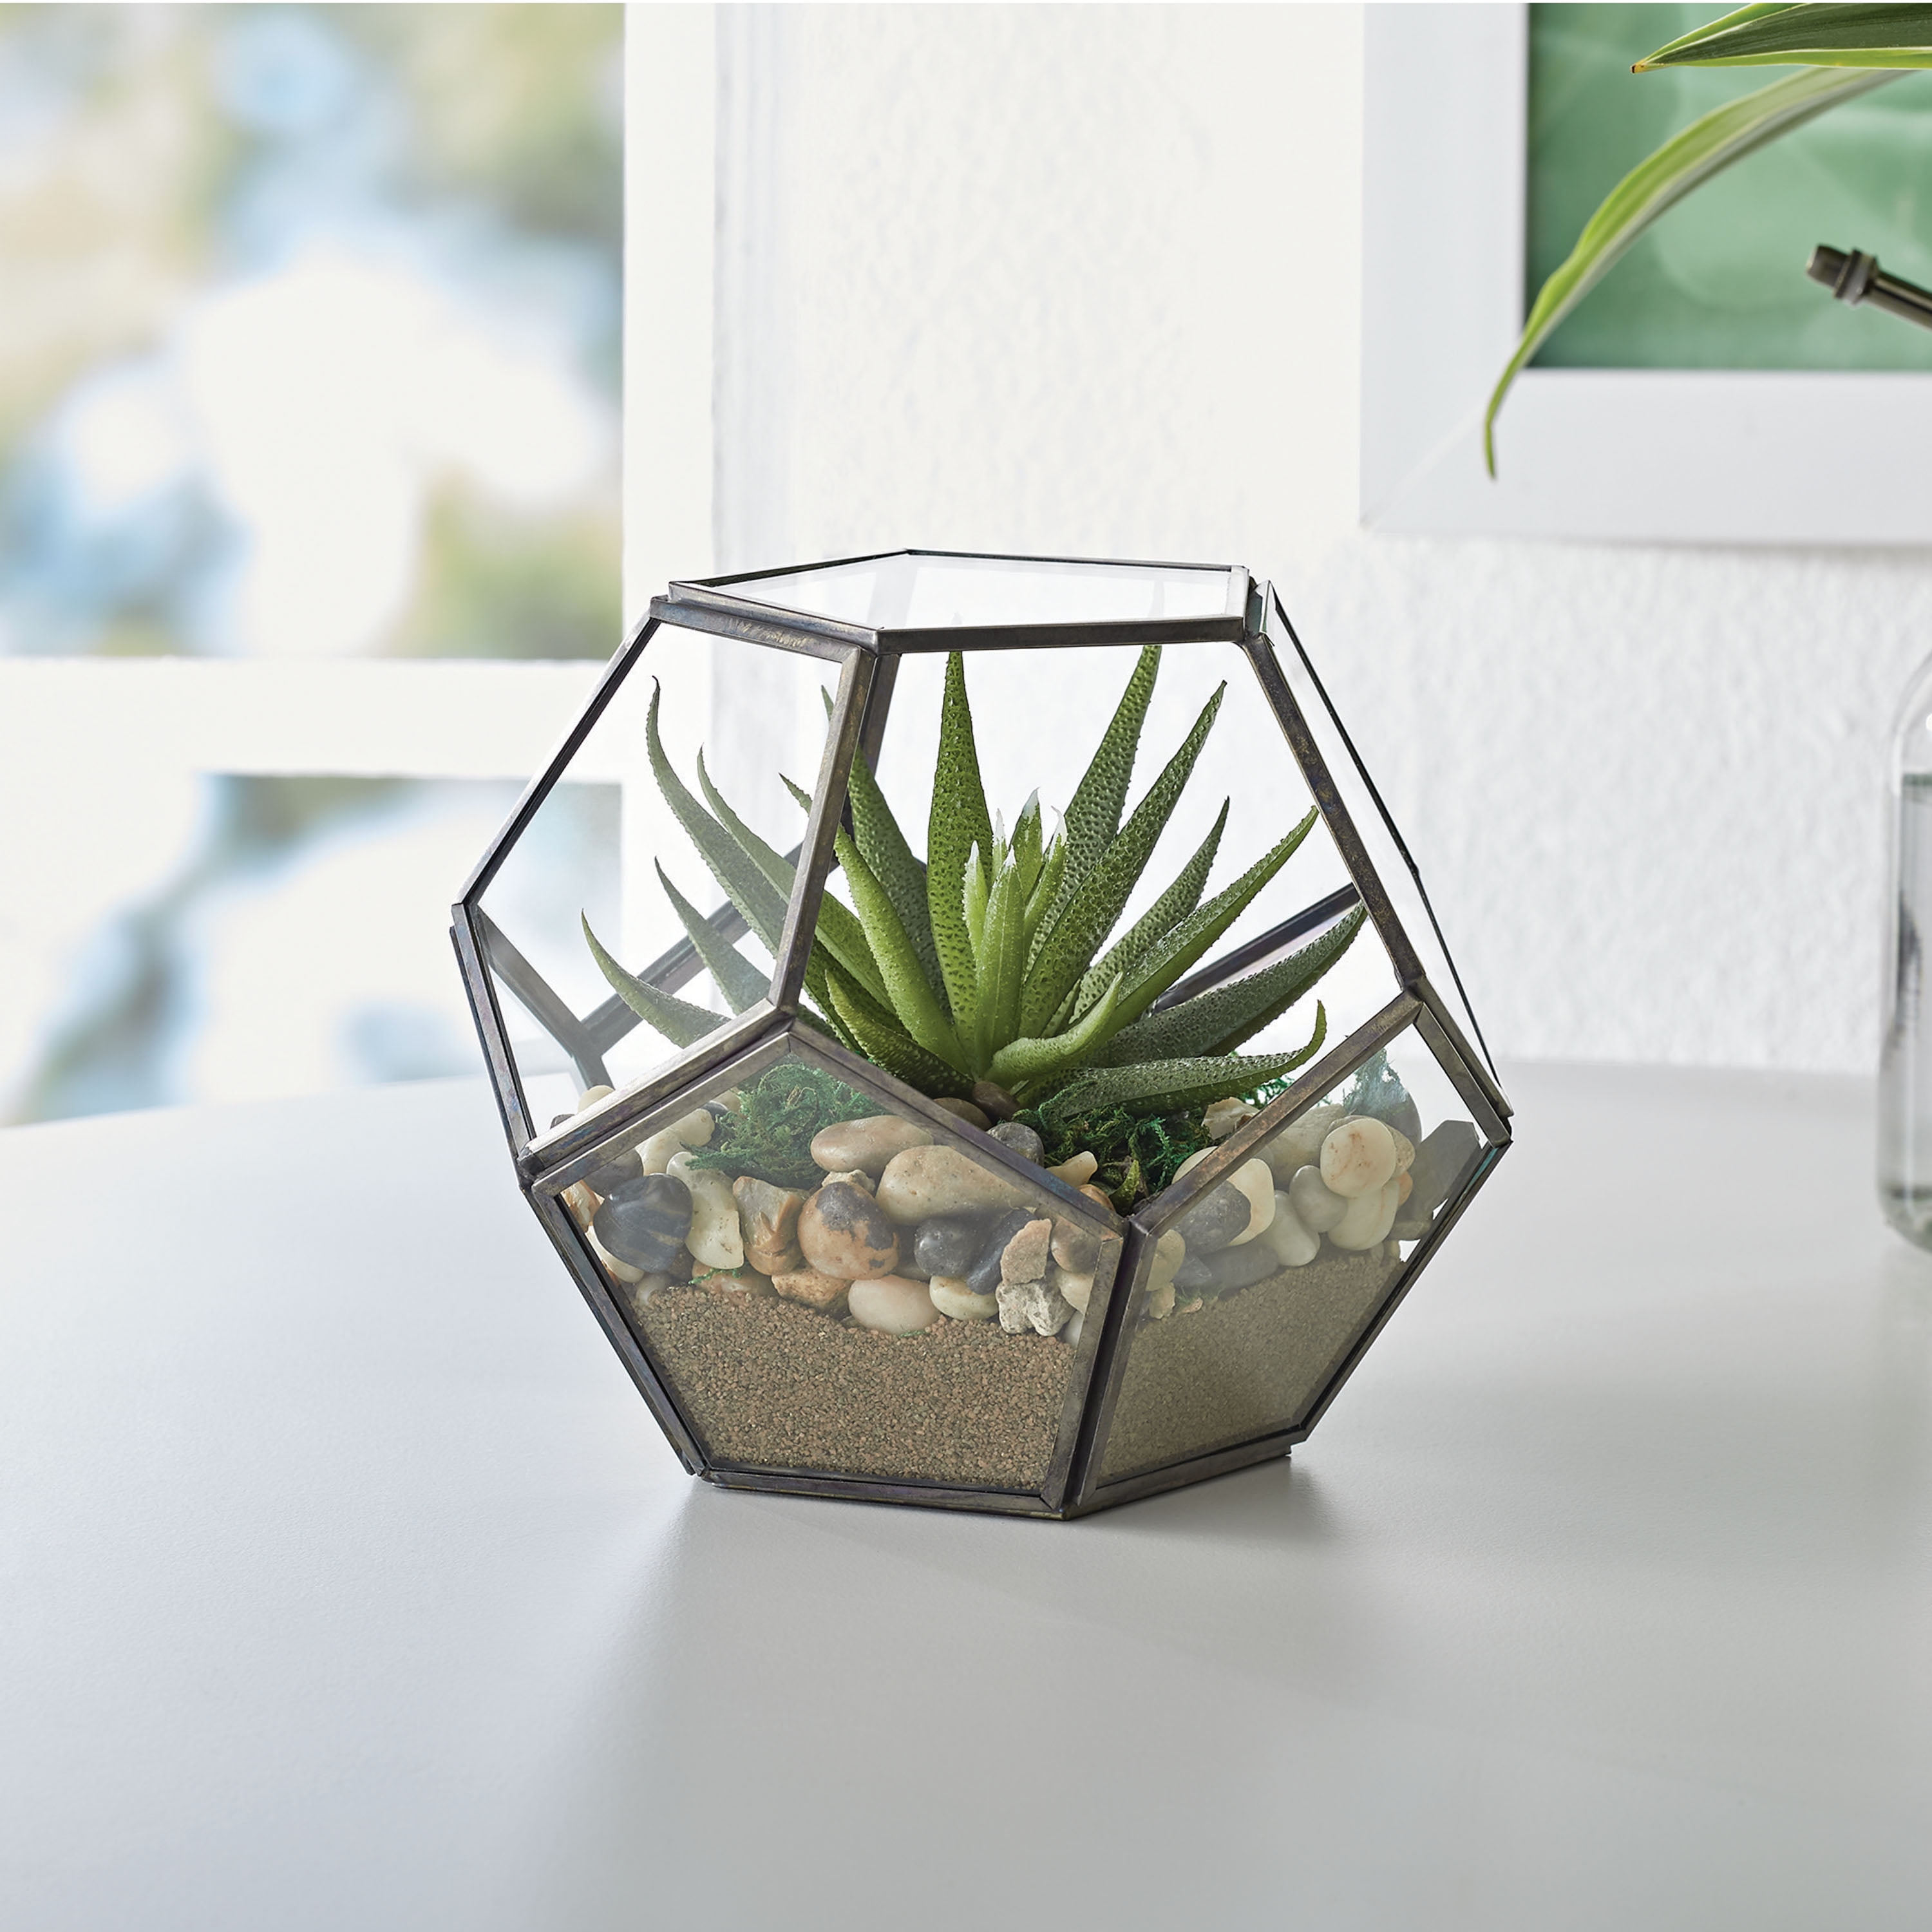 Air Plant Globes Display Bowl Jar Set of 2 Wall Mounted Clear Glass Terrariums 